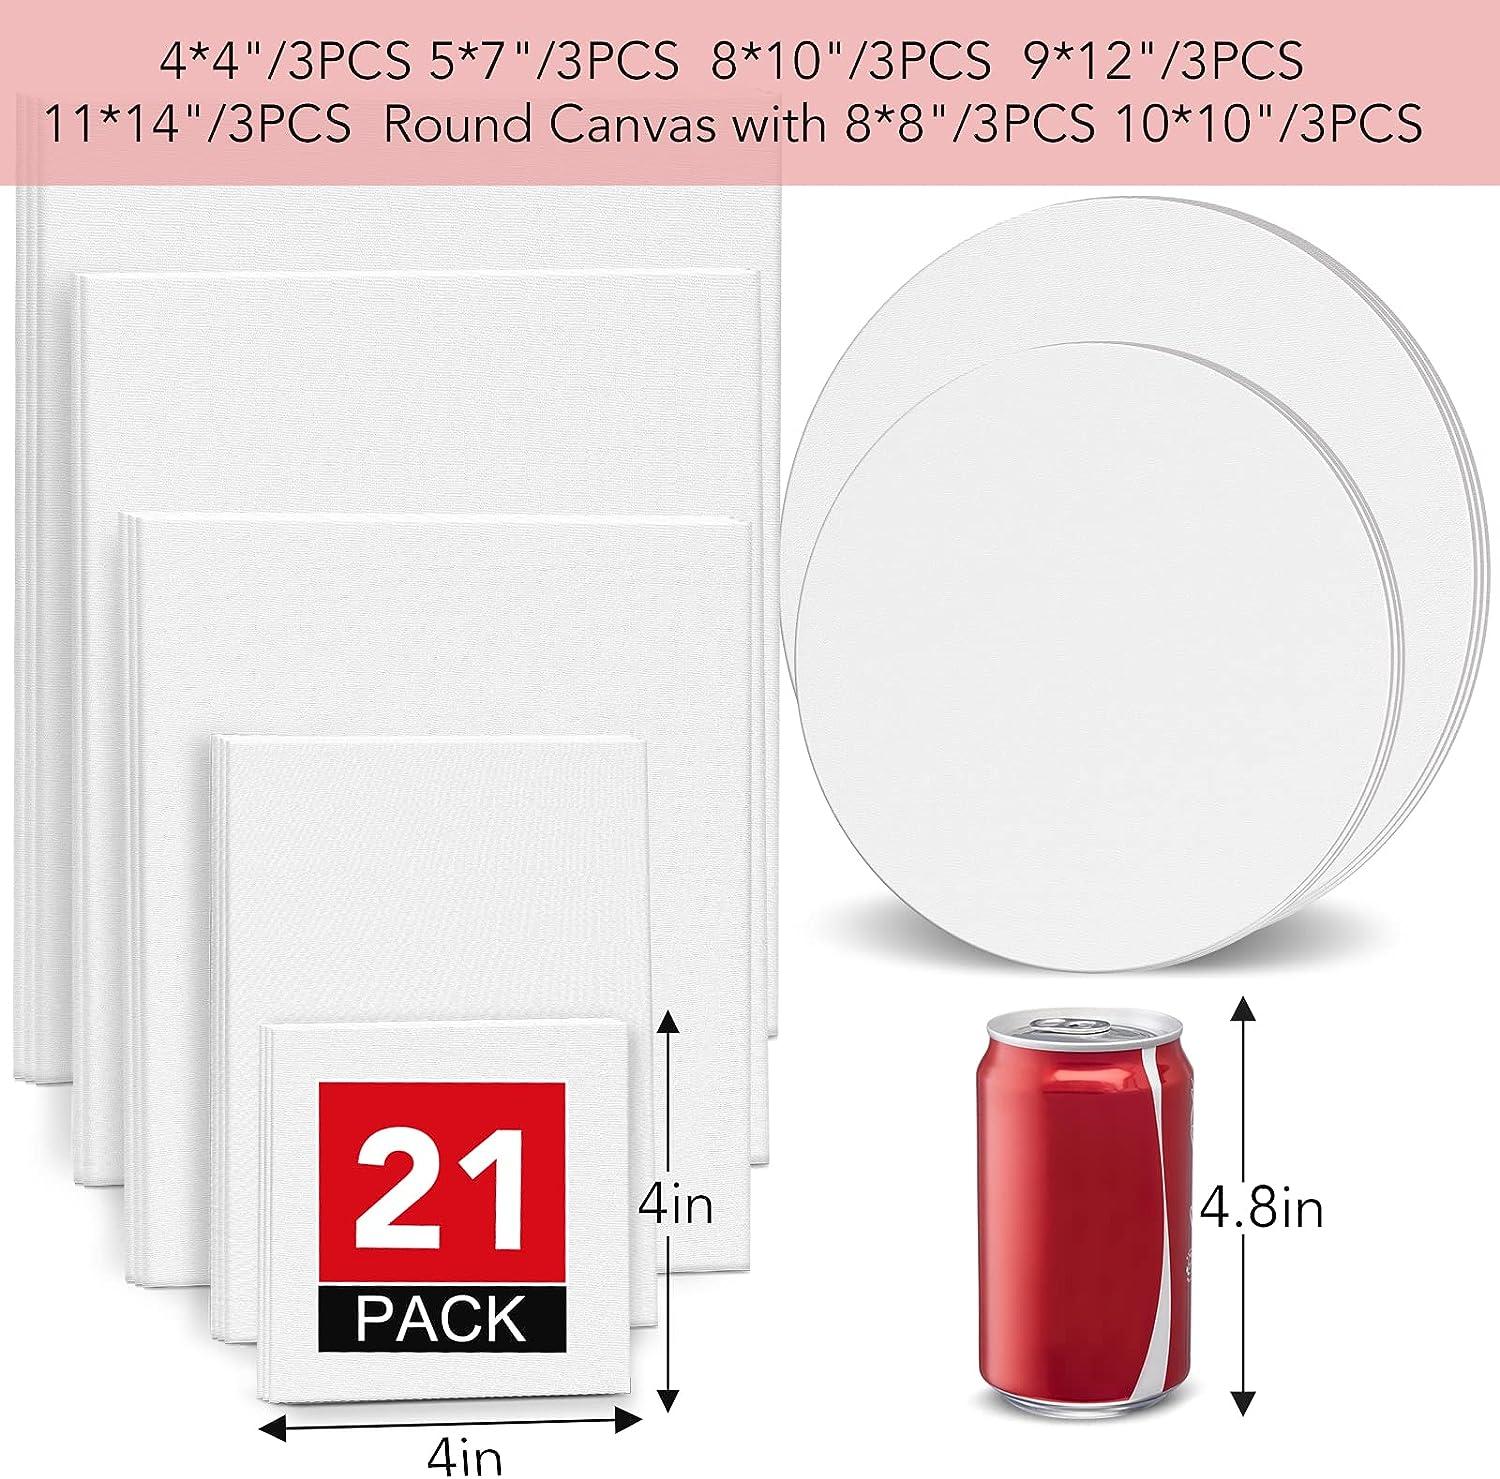  ESRICH Canvas Boards for Painting 8x10in,28 Pack Bulk